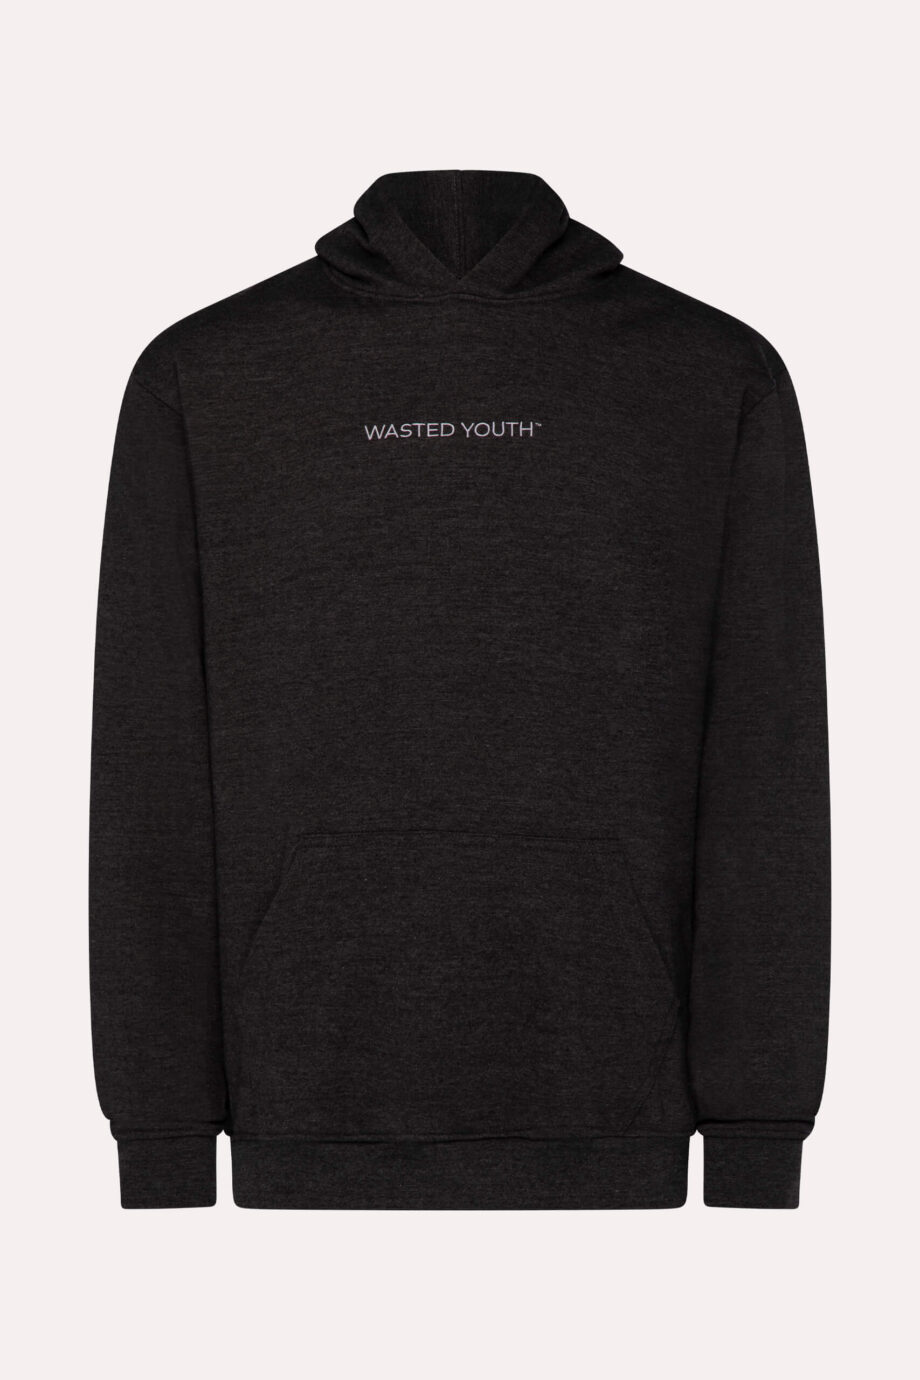 Hoodies - Wasted Youth™